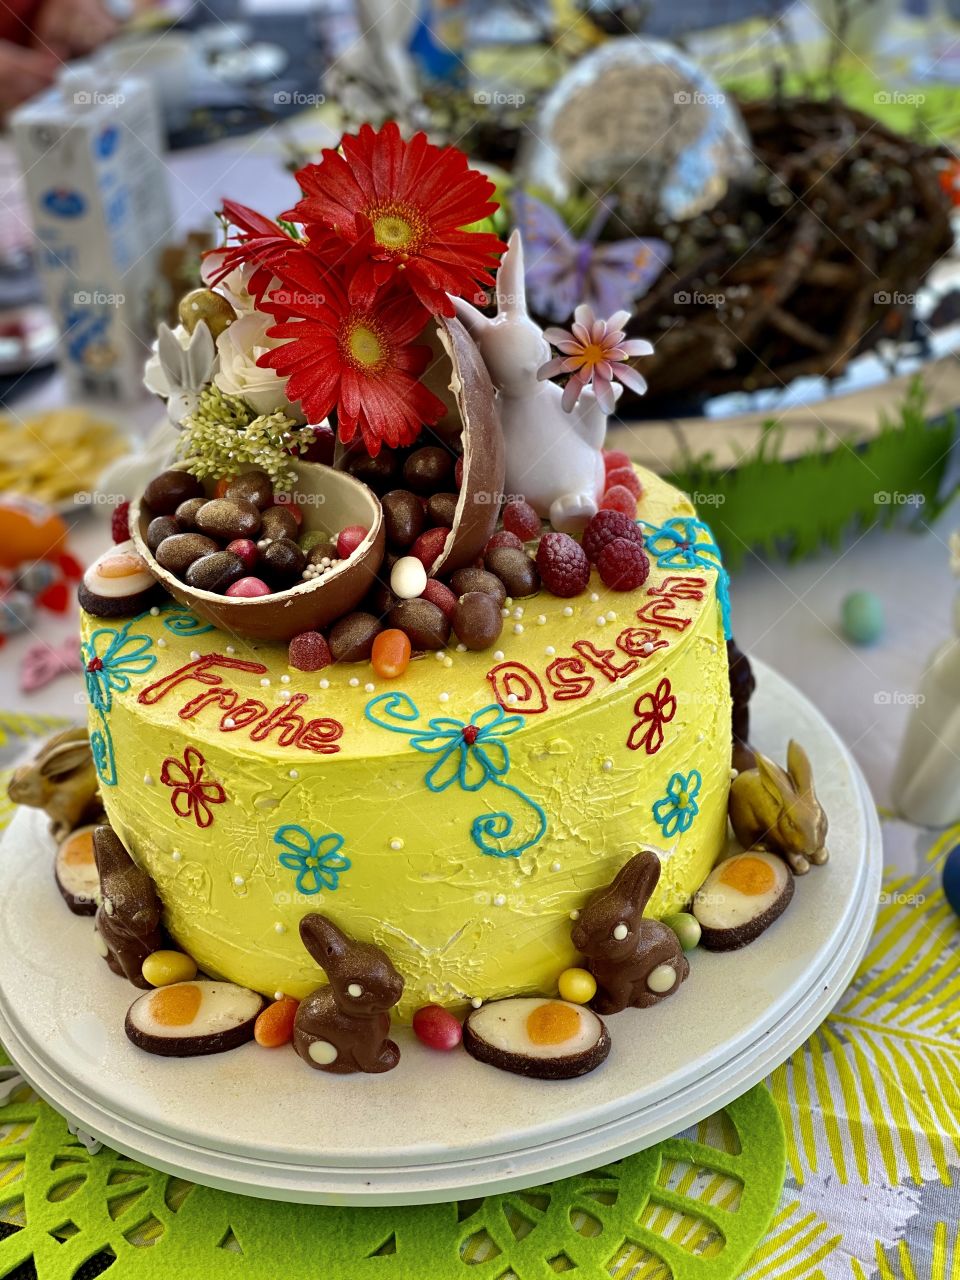 birthday cake for Easter, eggs, sweets, chocolate, flowers, decorated table for the holiday